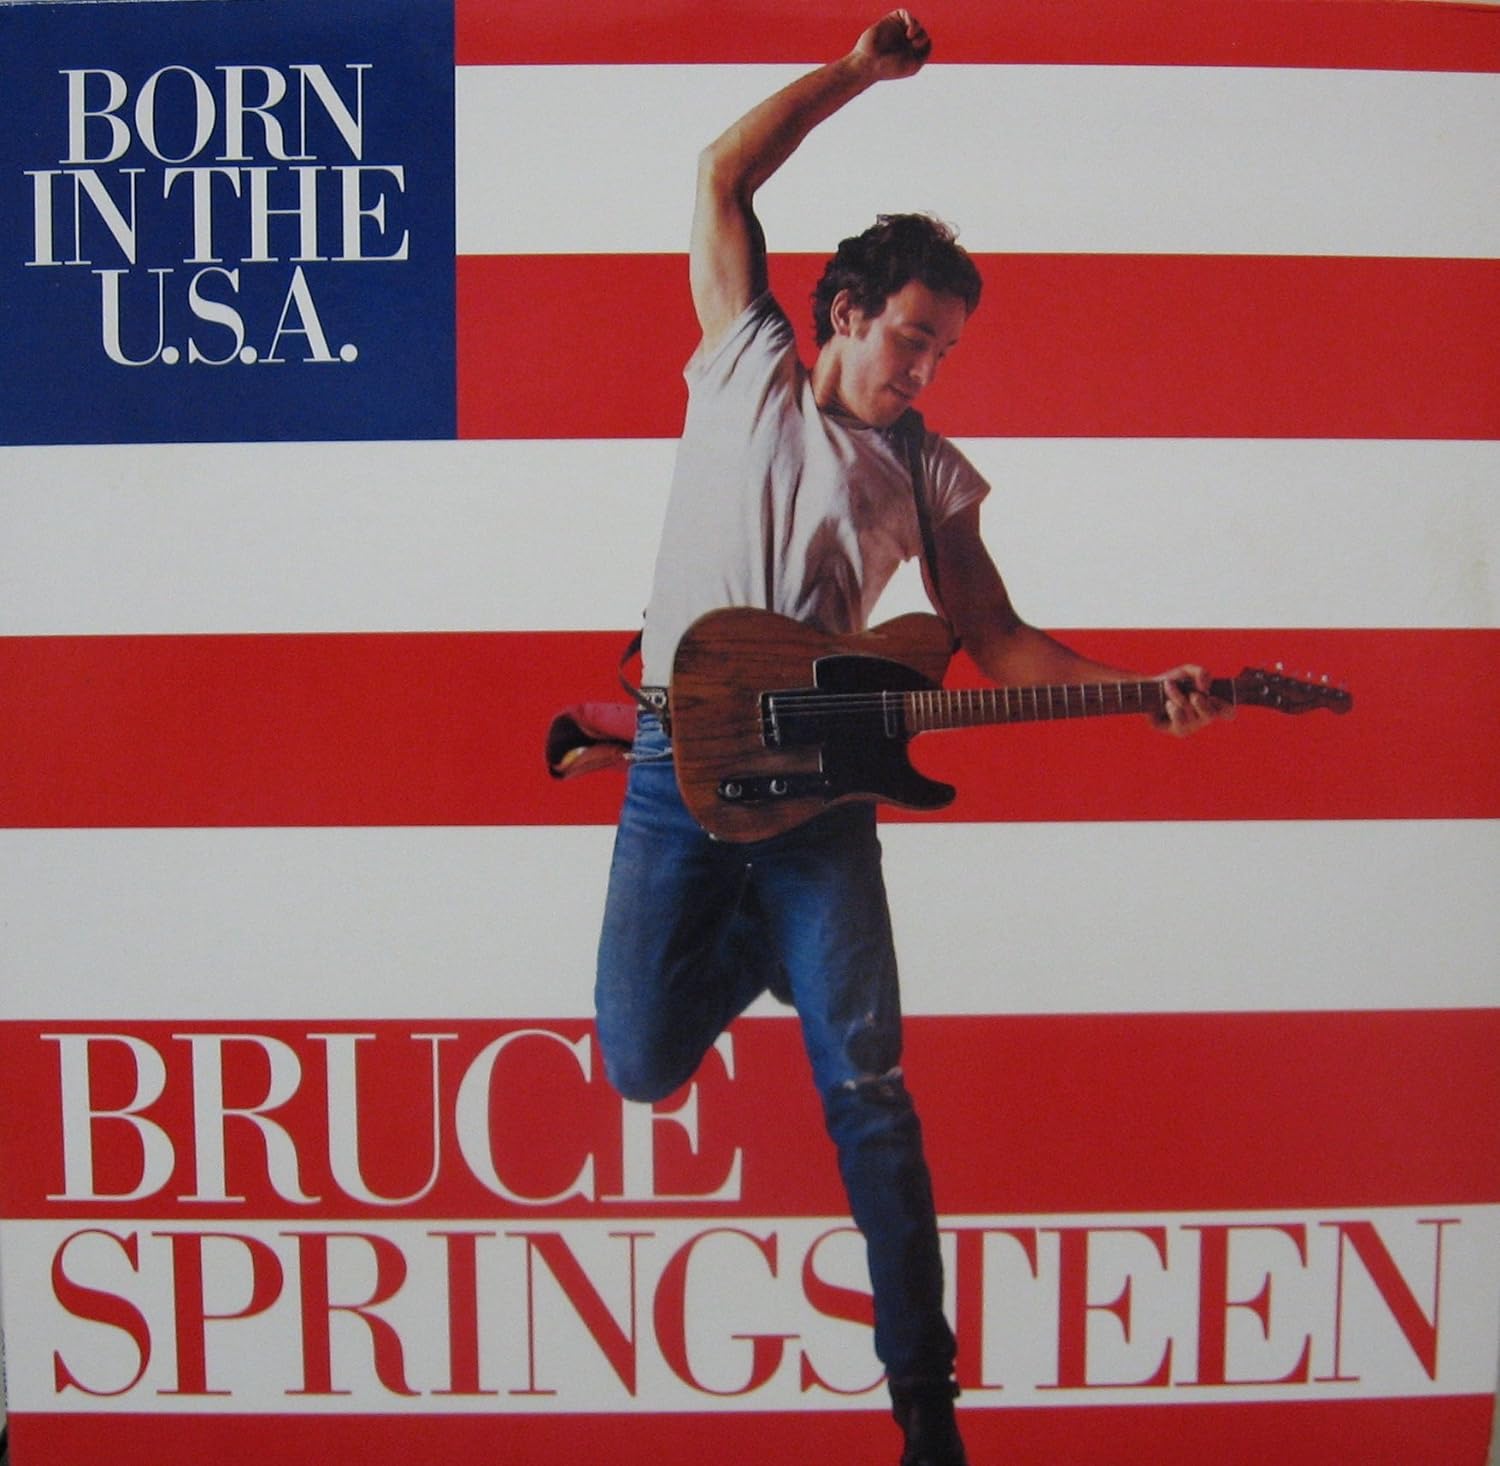 Born in the U.S.A. by Bruce Springsteen 80s song lyrics.